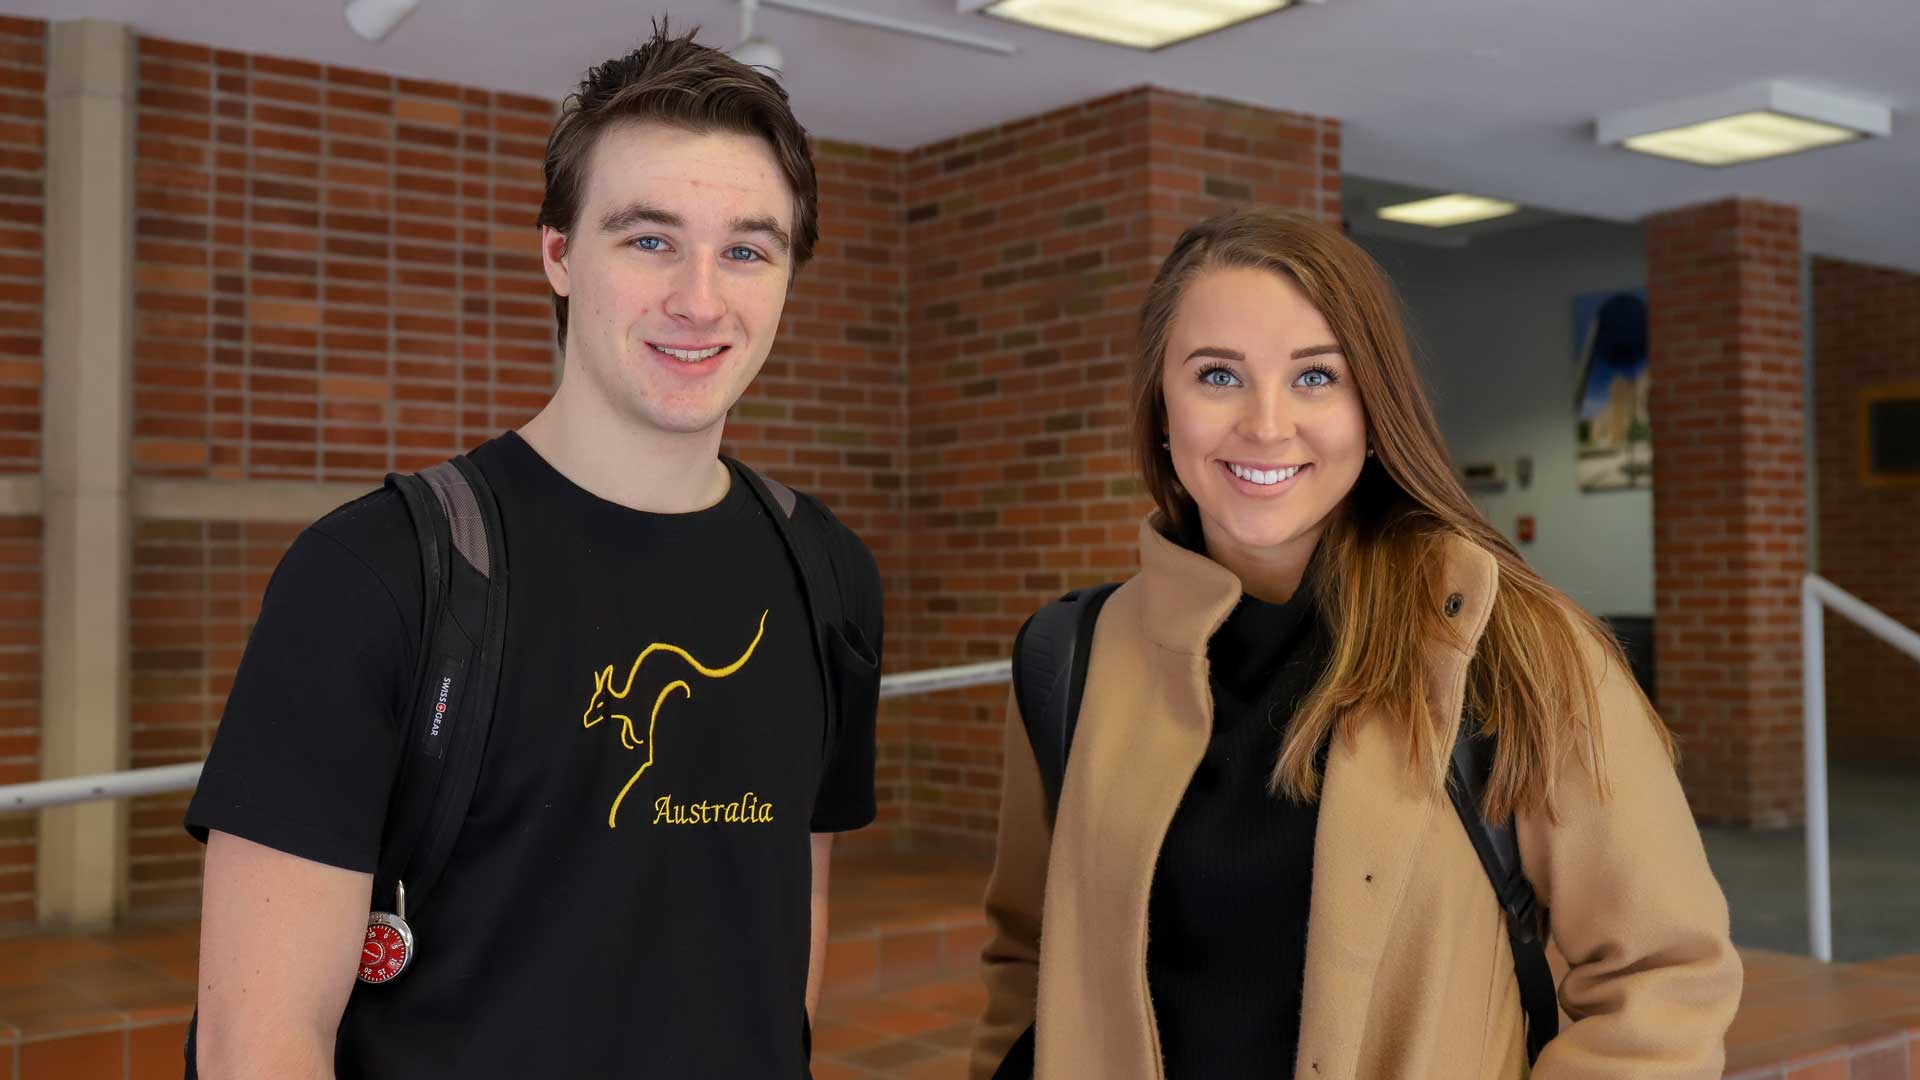 Two students stand together smiling in a college university building with a brick wall behind them.